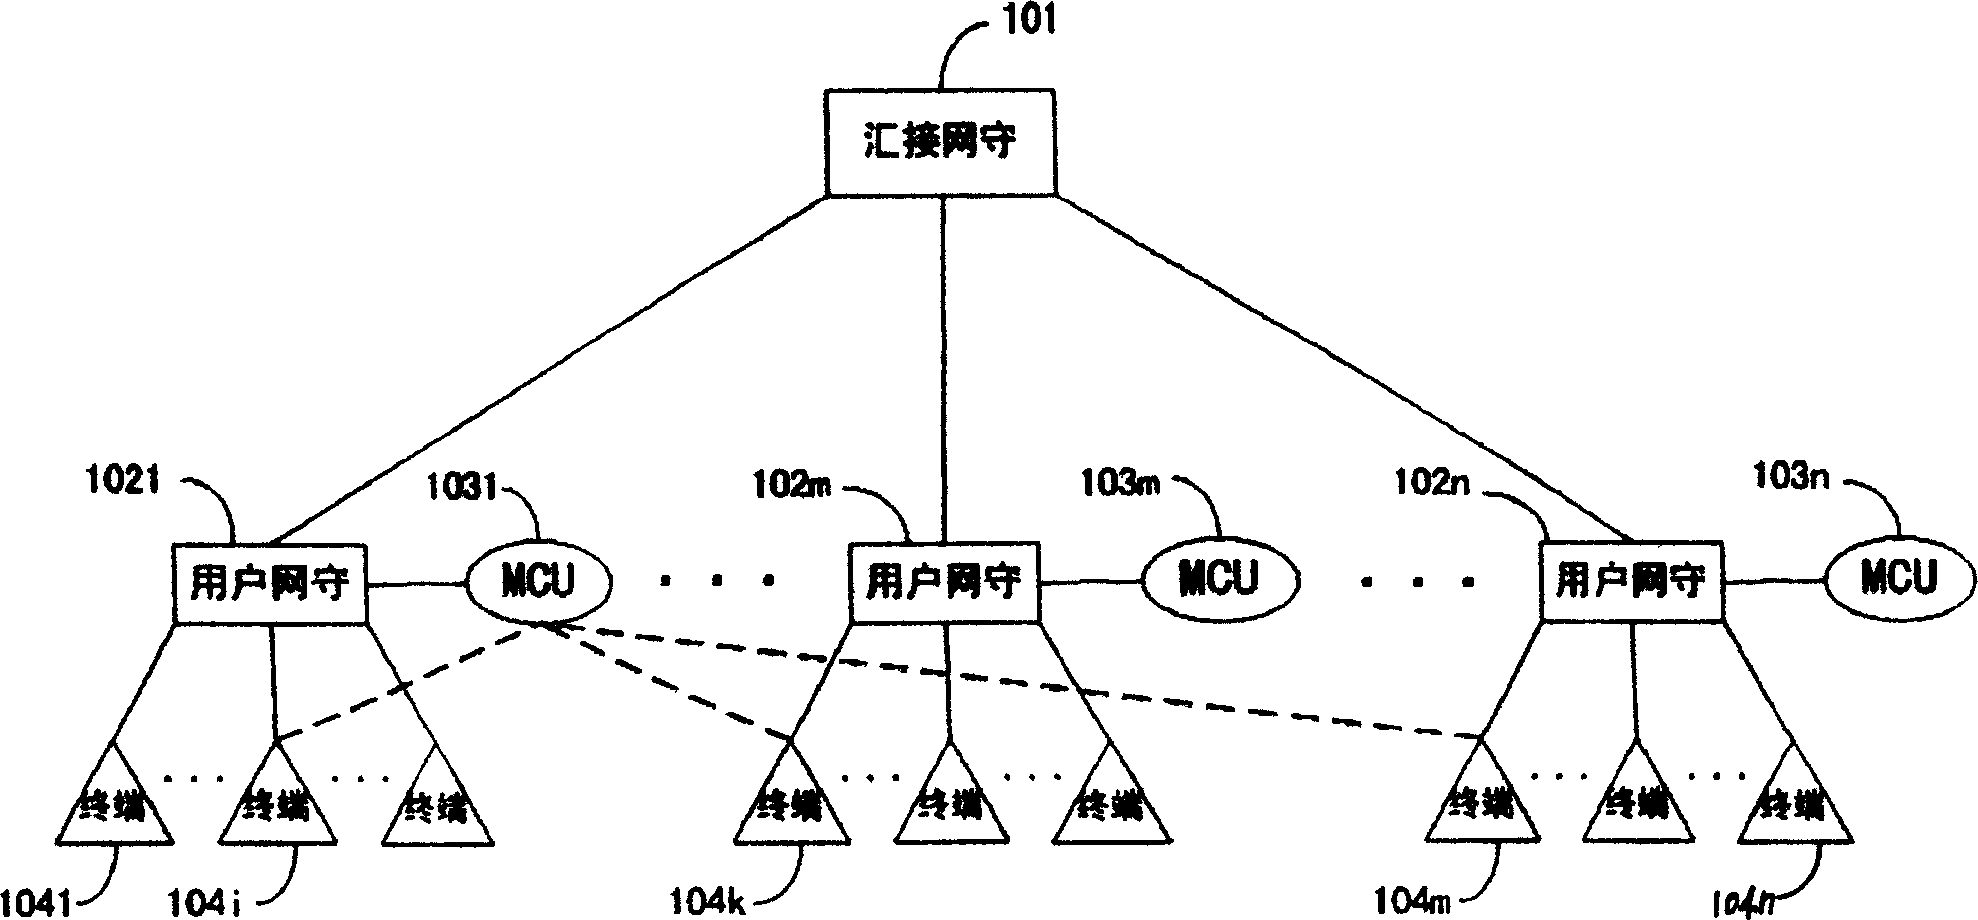 Distributed multimedia conference system based on IP network